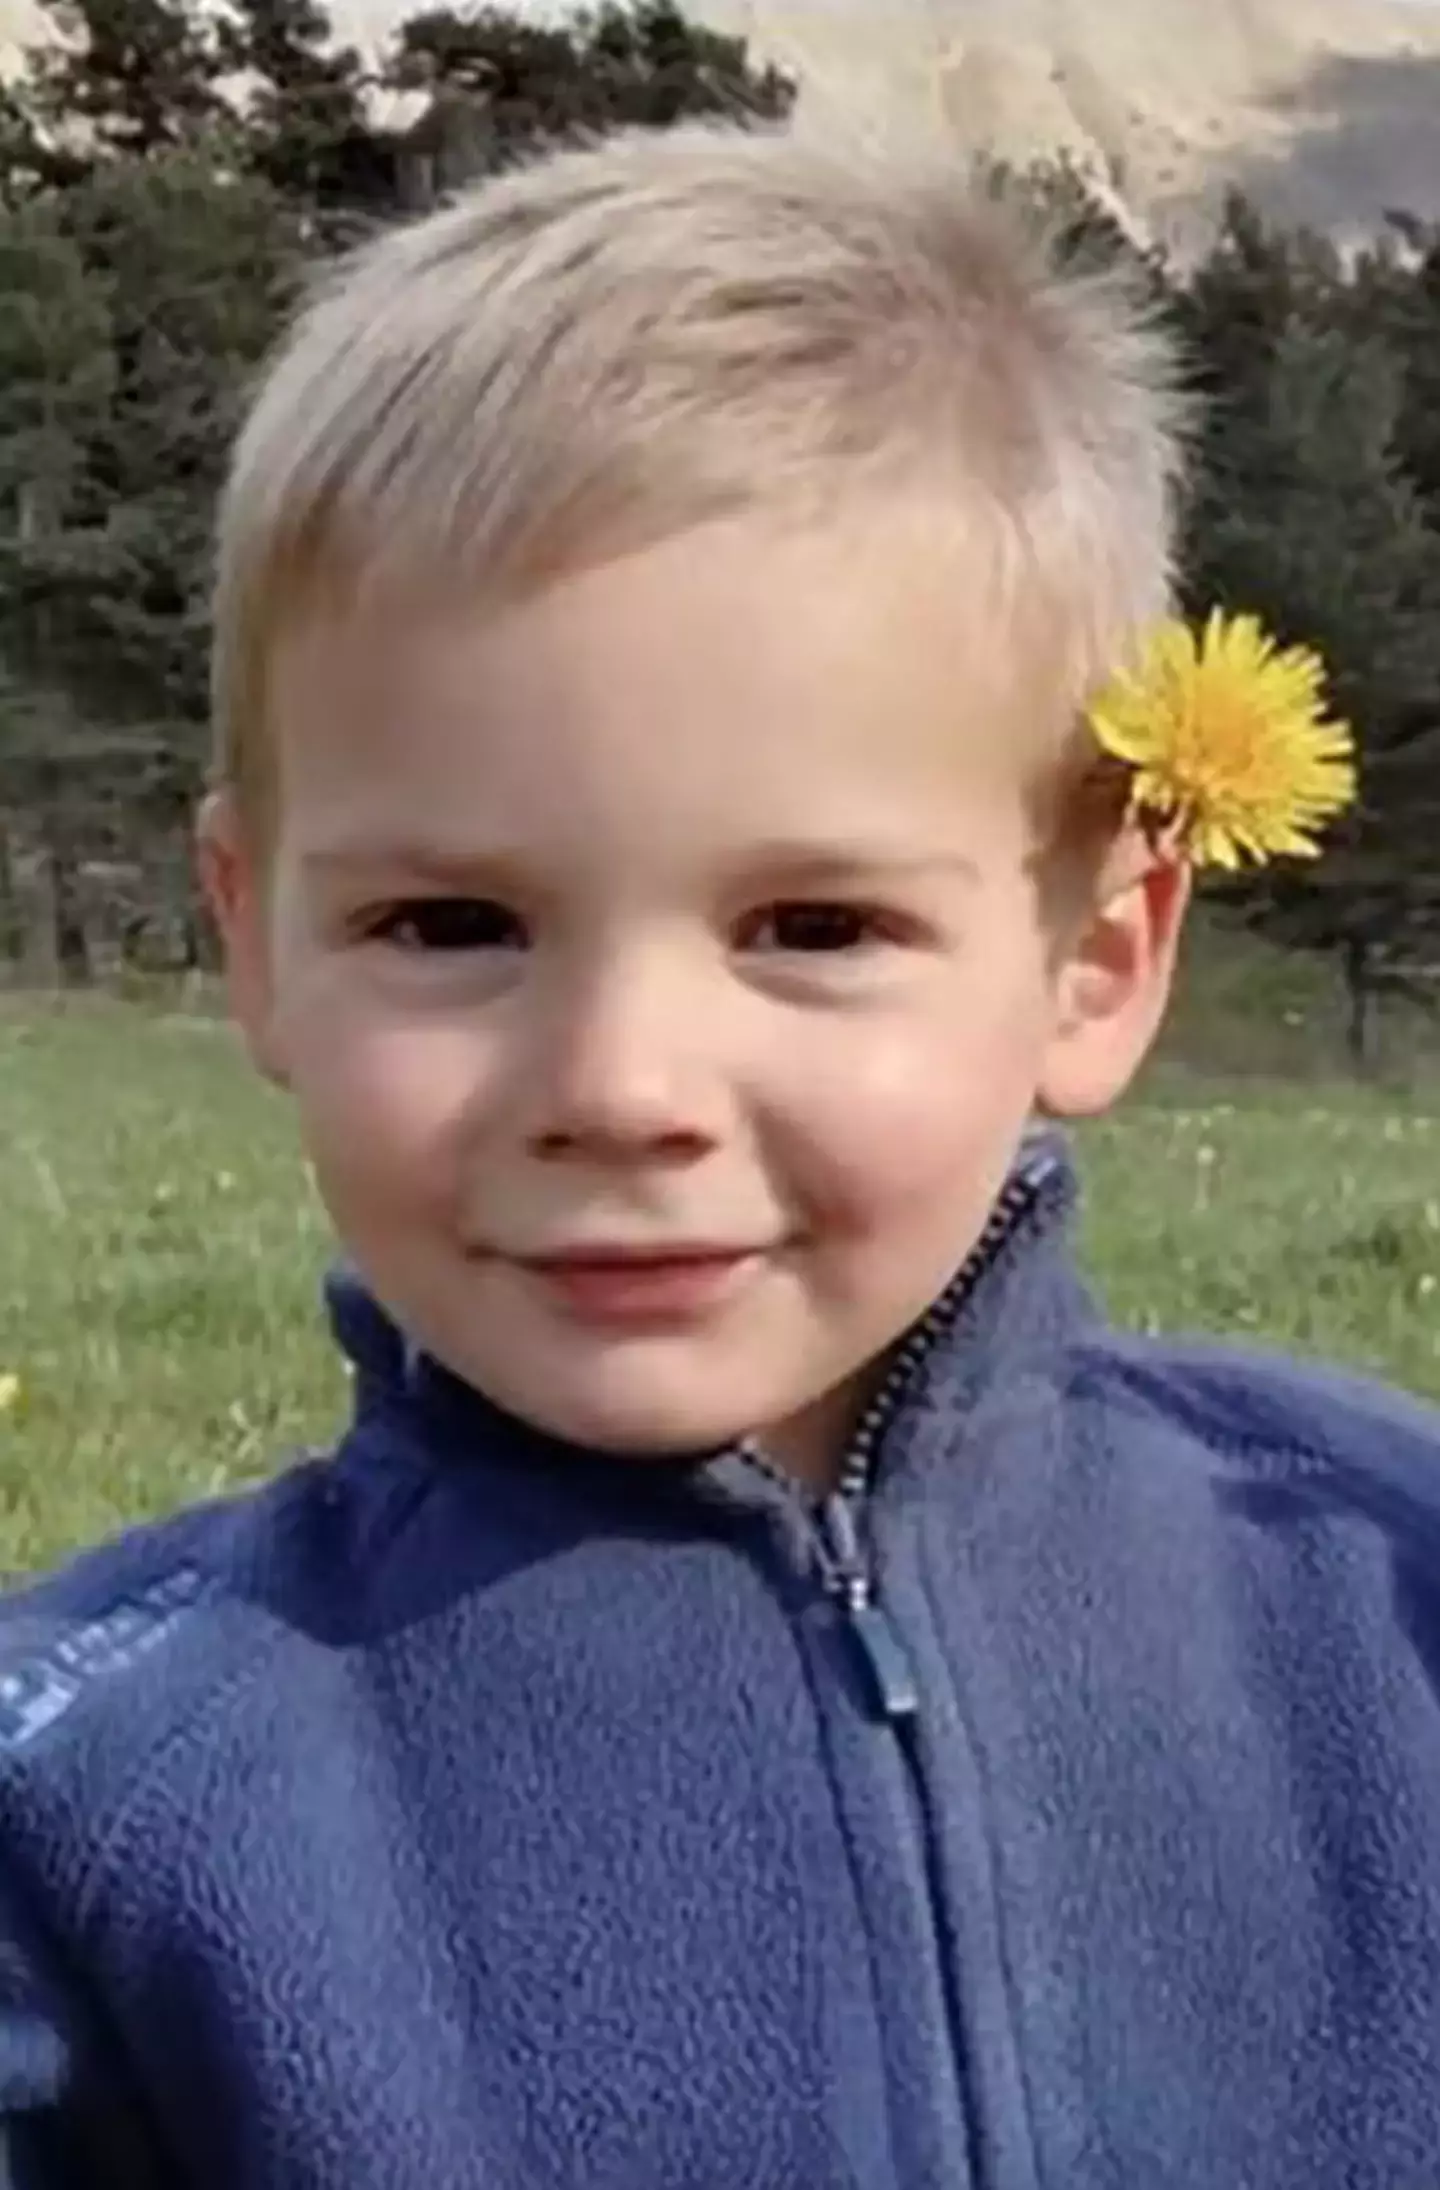 Émile Soleil disappeared from his grandparent's holiday home last year.